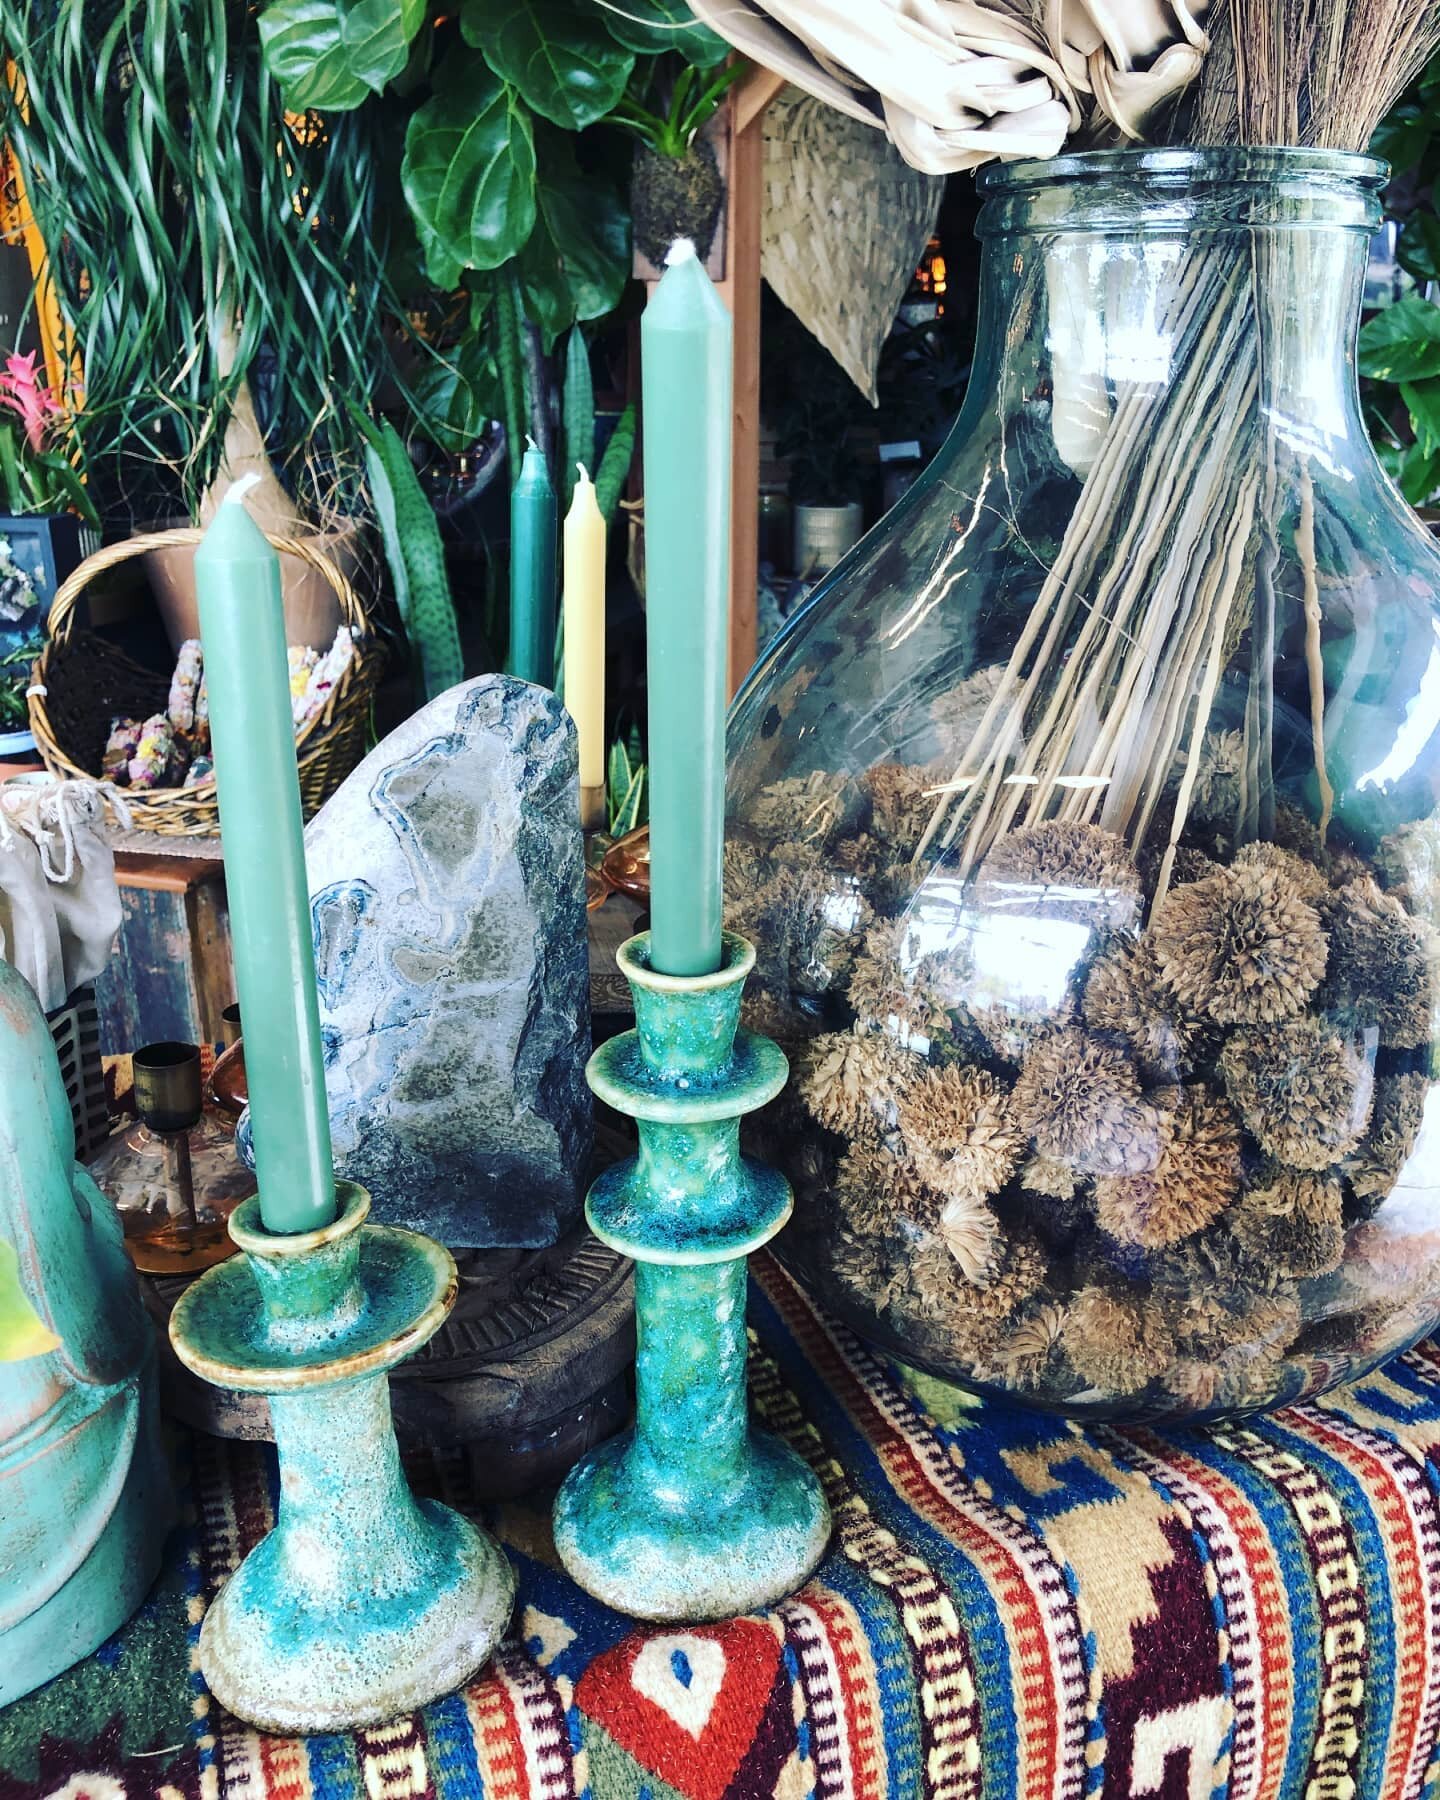 New handmade candle holders 🕯✨
.
.
.
#liveleafsd #carlsbad #sanmarcos #vista #oceanside #sandiego #encinitas #northcountysandiego #giftgiving #giving #gifts #shoplocal #shopsmall #smallbusiness #smallbusinesssupport #smallbusinesssaturday